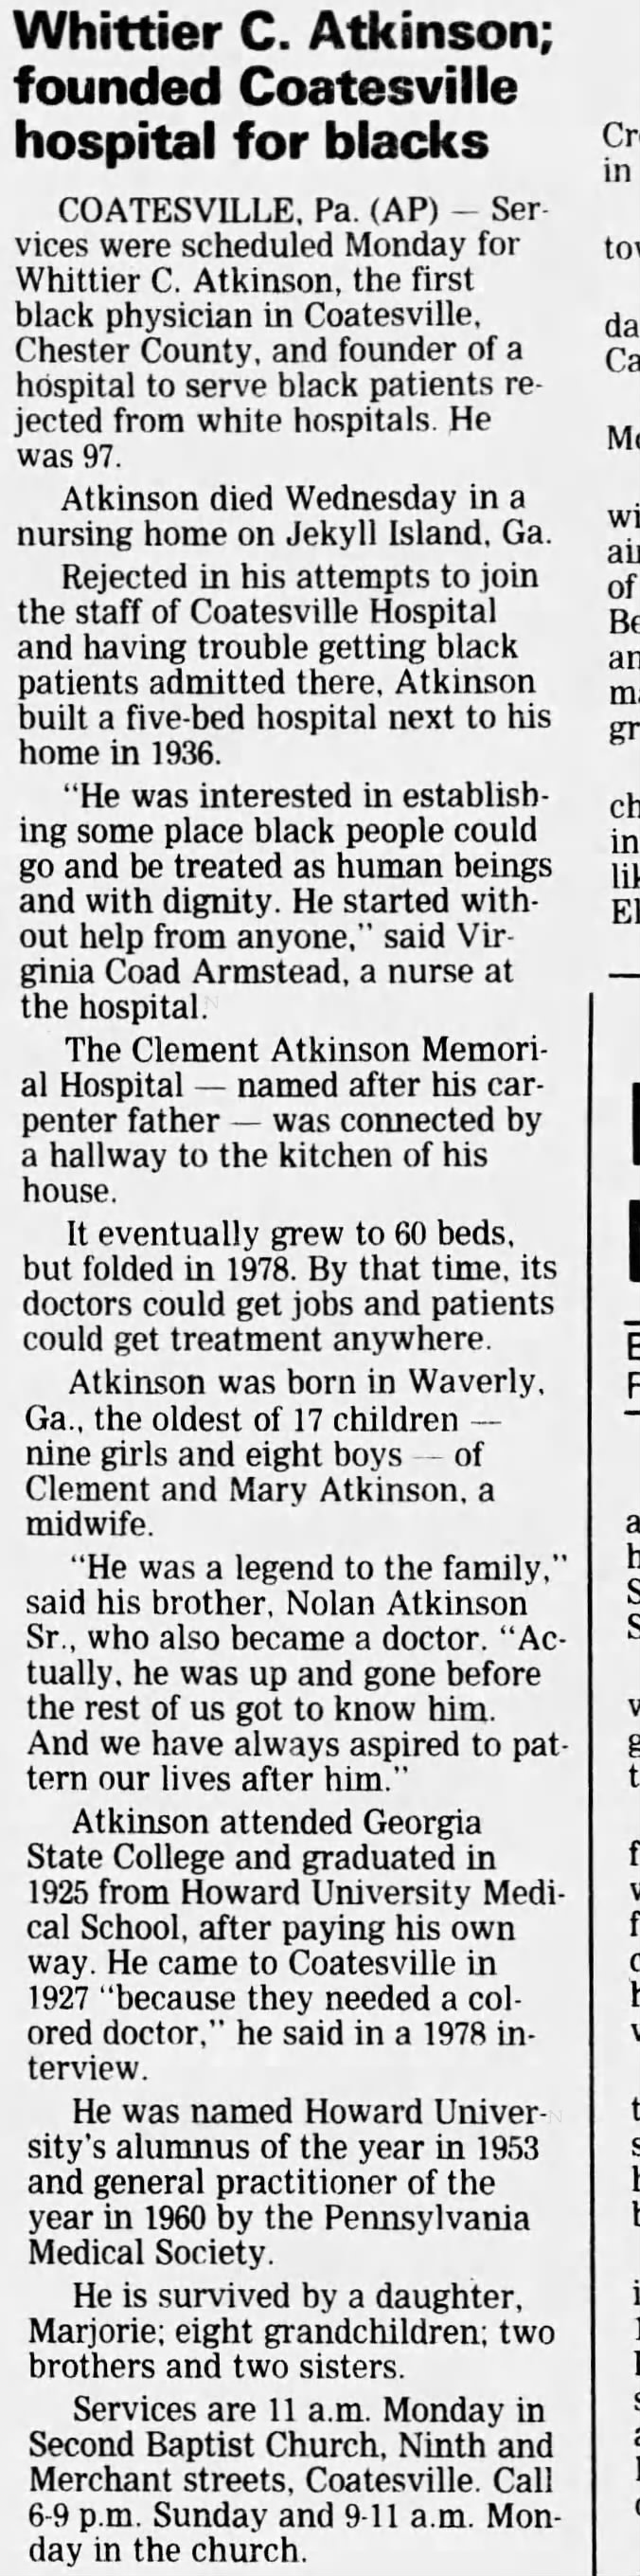 Dr. W. C. Atkinson obituary in newspapaers